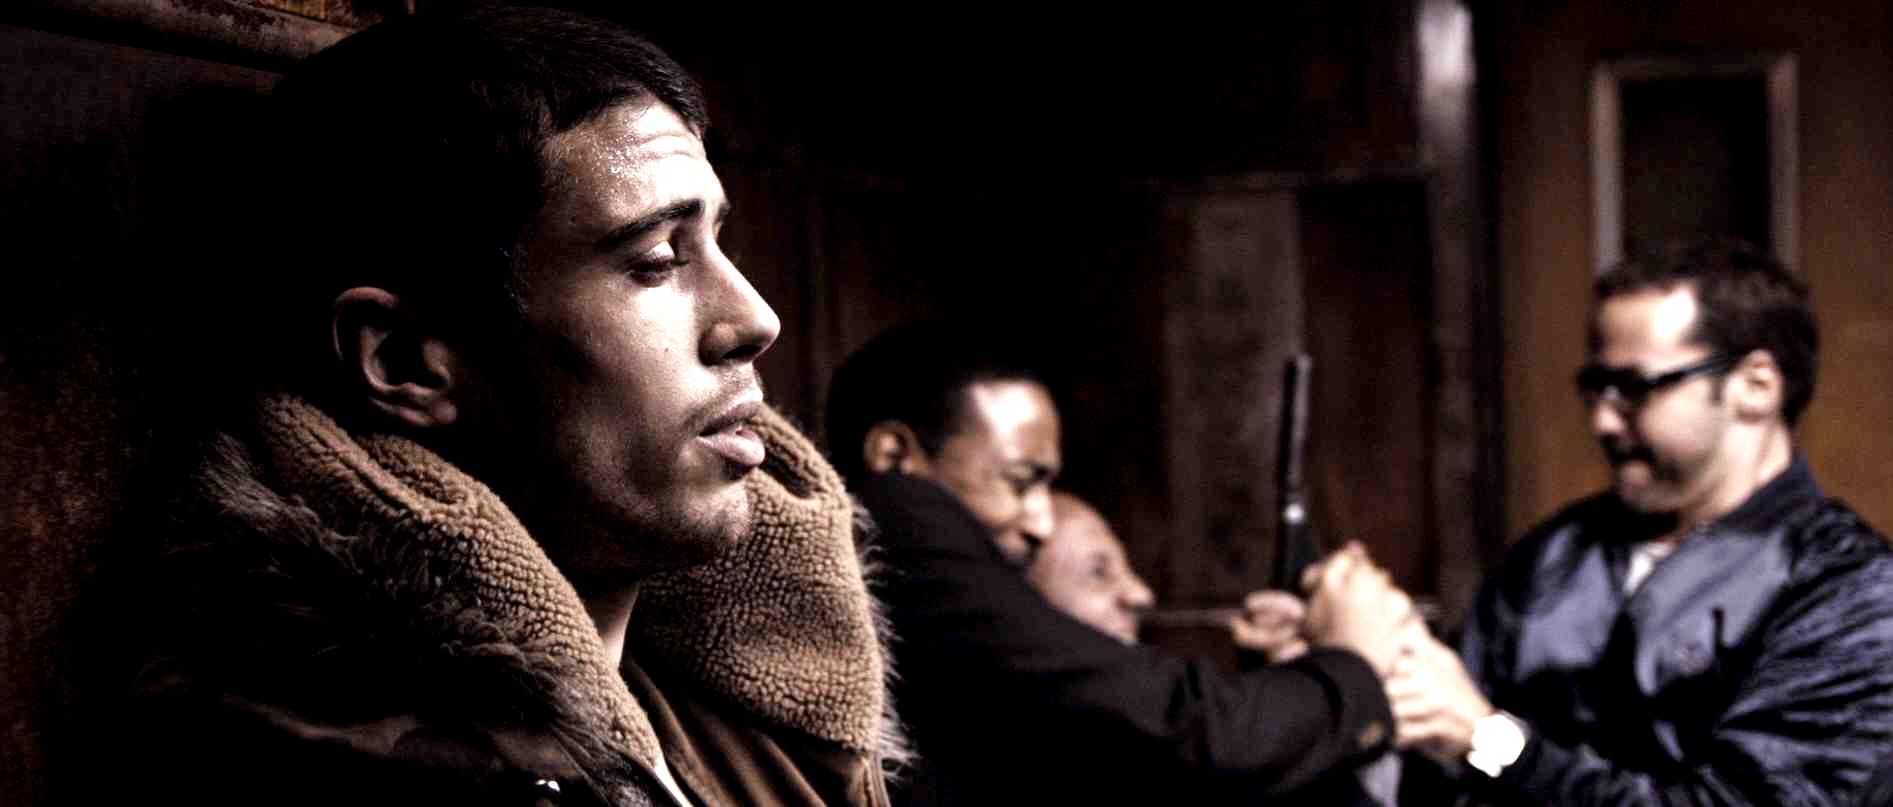 Guy ritchie movies, Toby kebbell, Guy .com